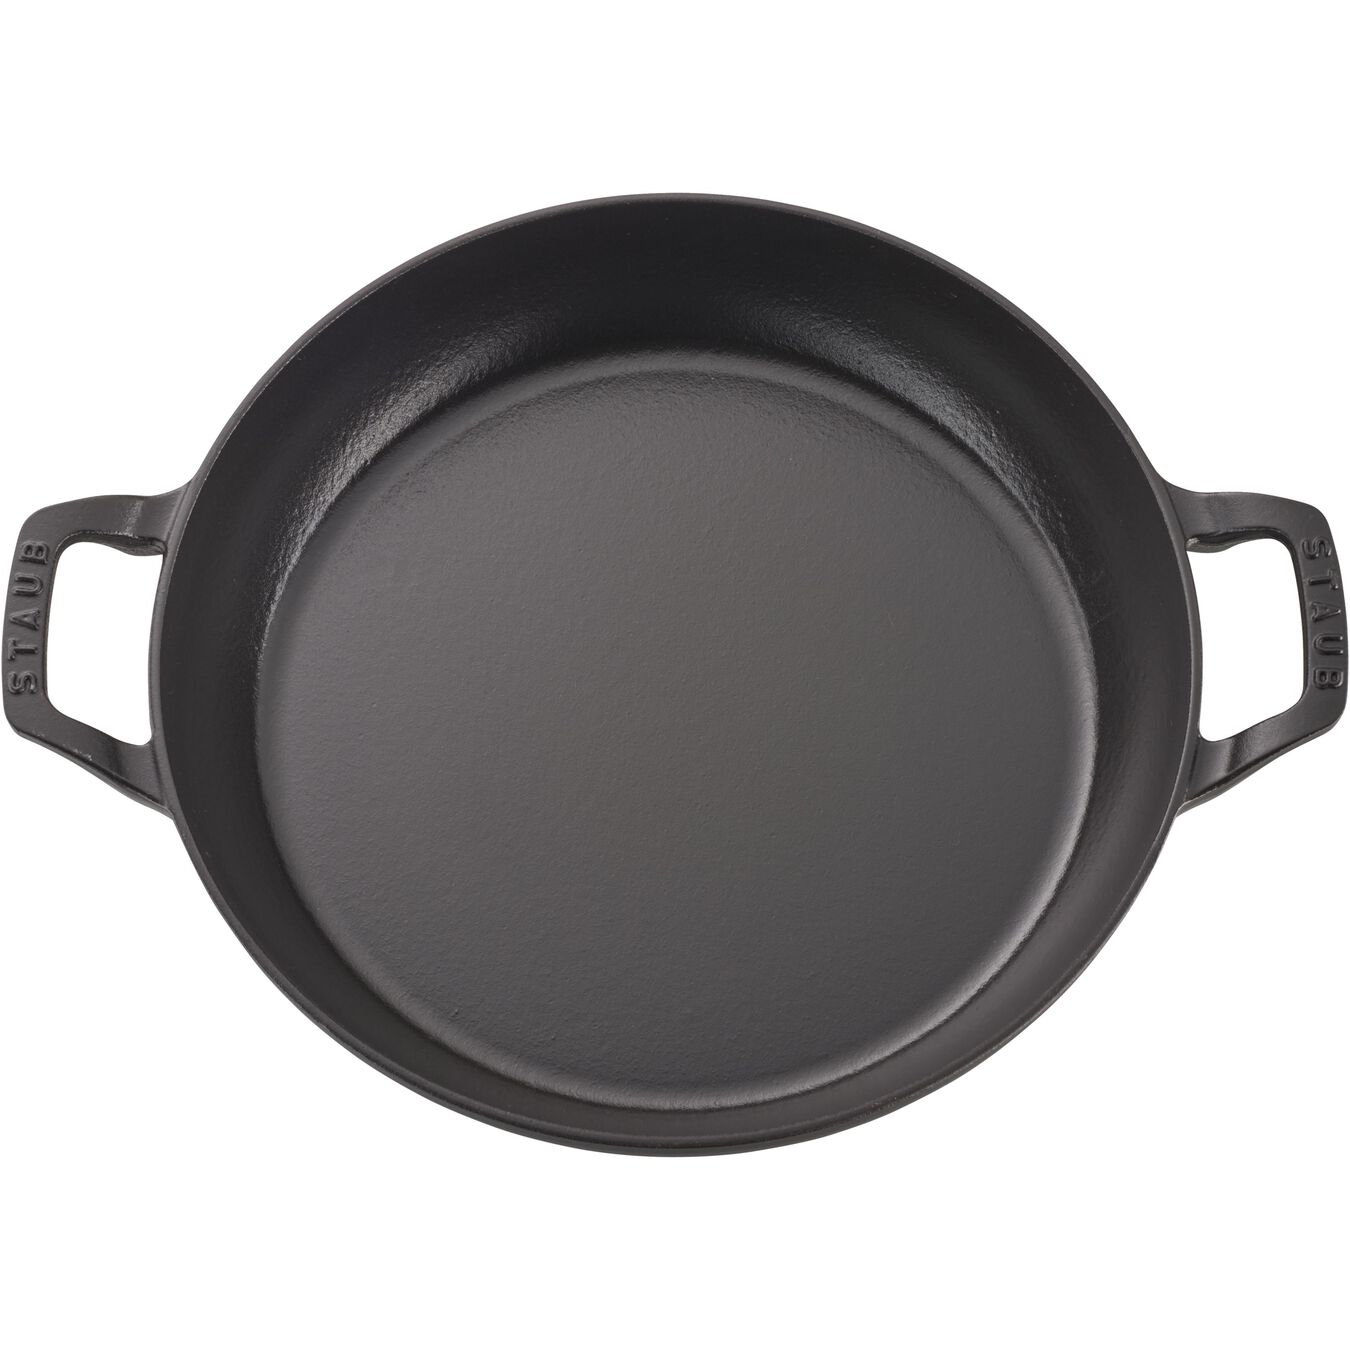 12-inch, Saute pan with glass lid, graphite grey - Visual Imperfections,,large 2